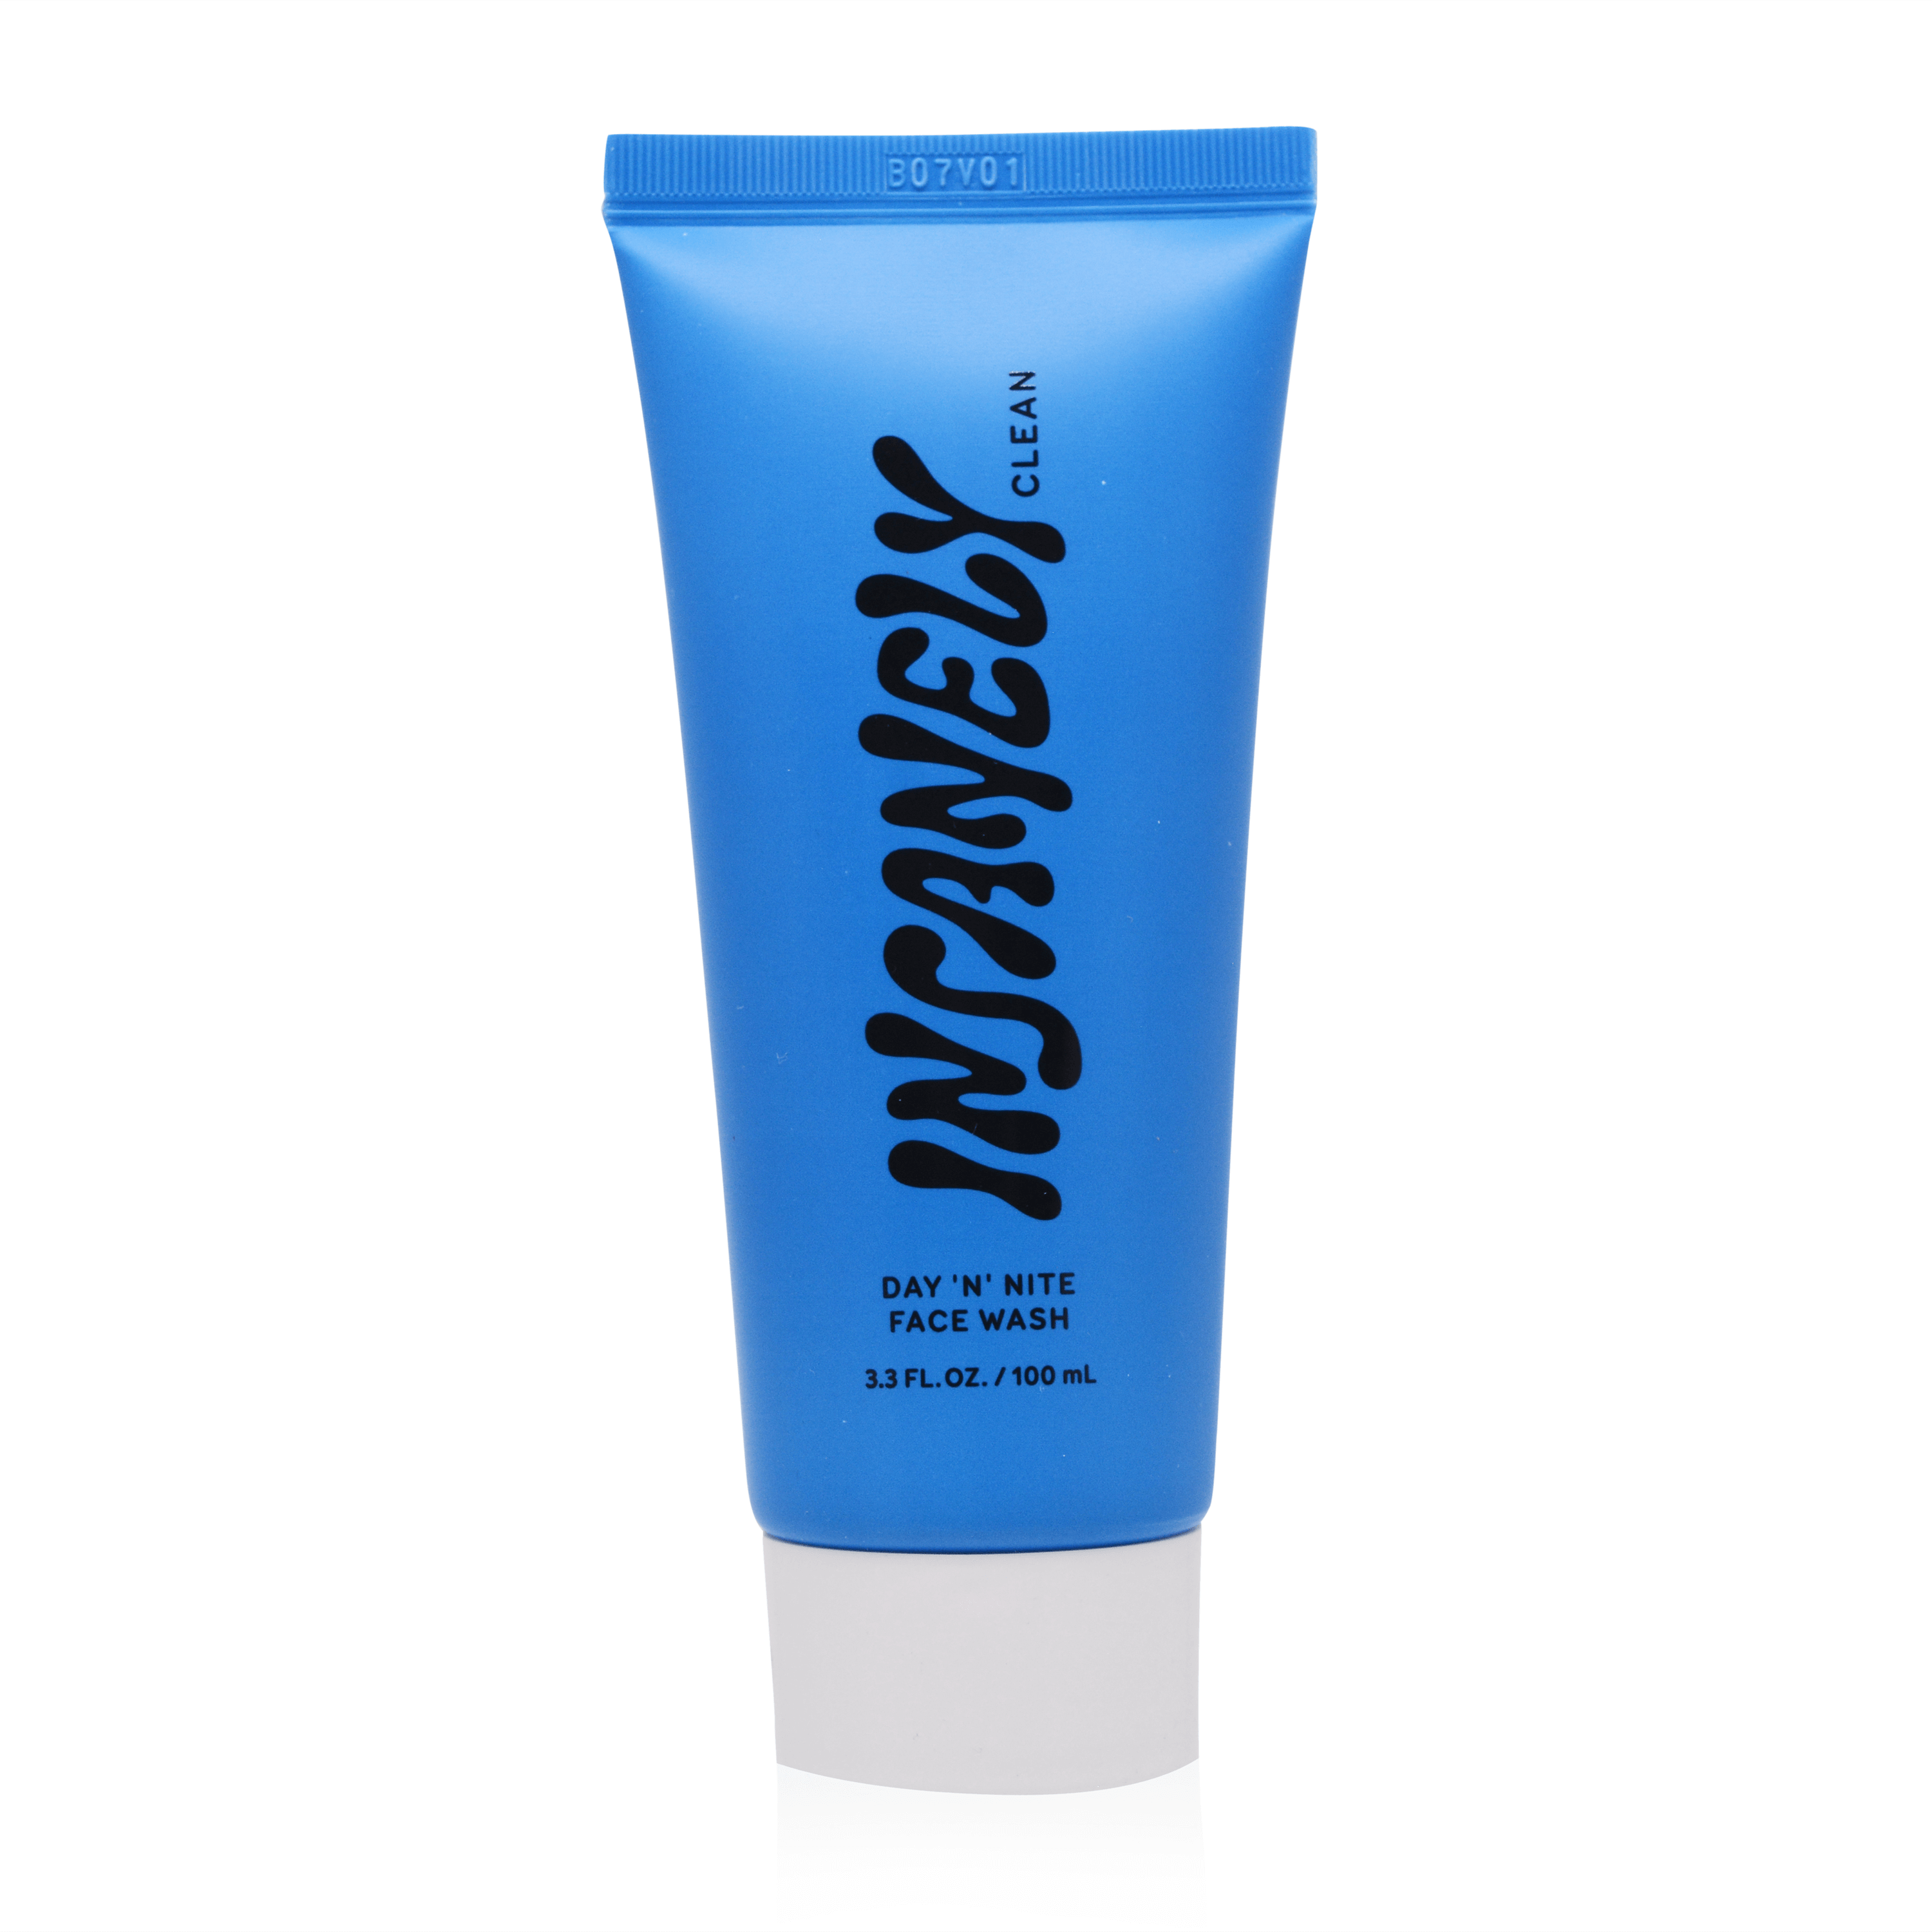 The best men's face wash for glowing skin displayed against a white background.